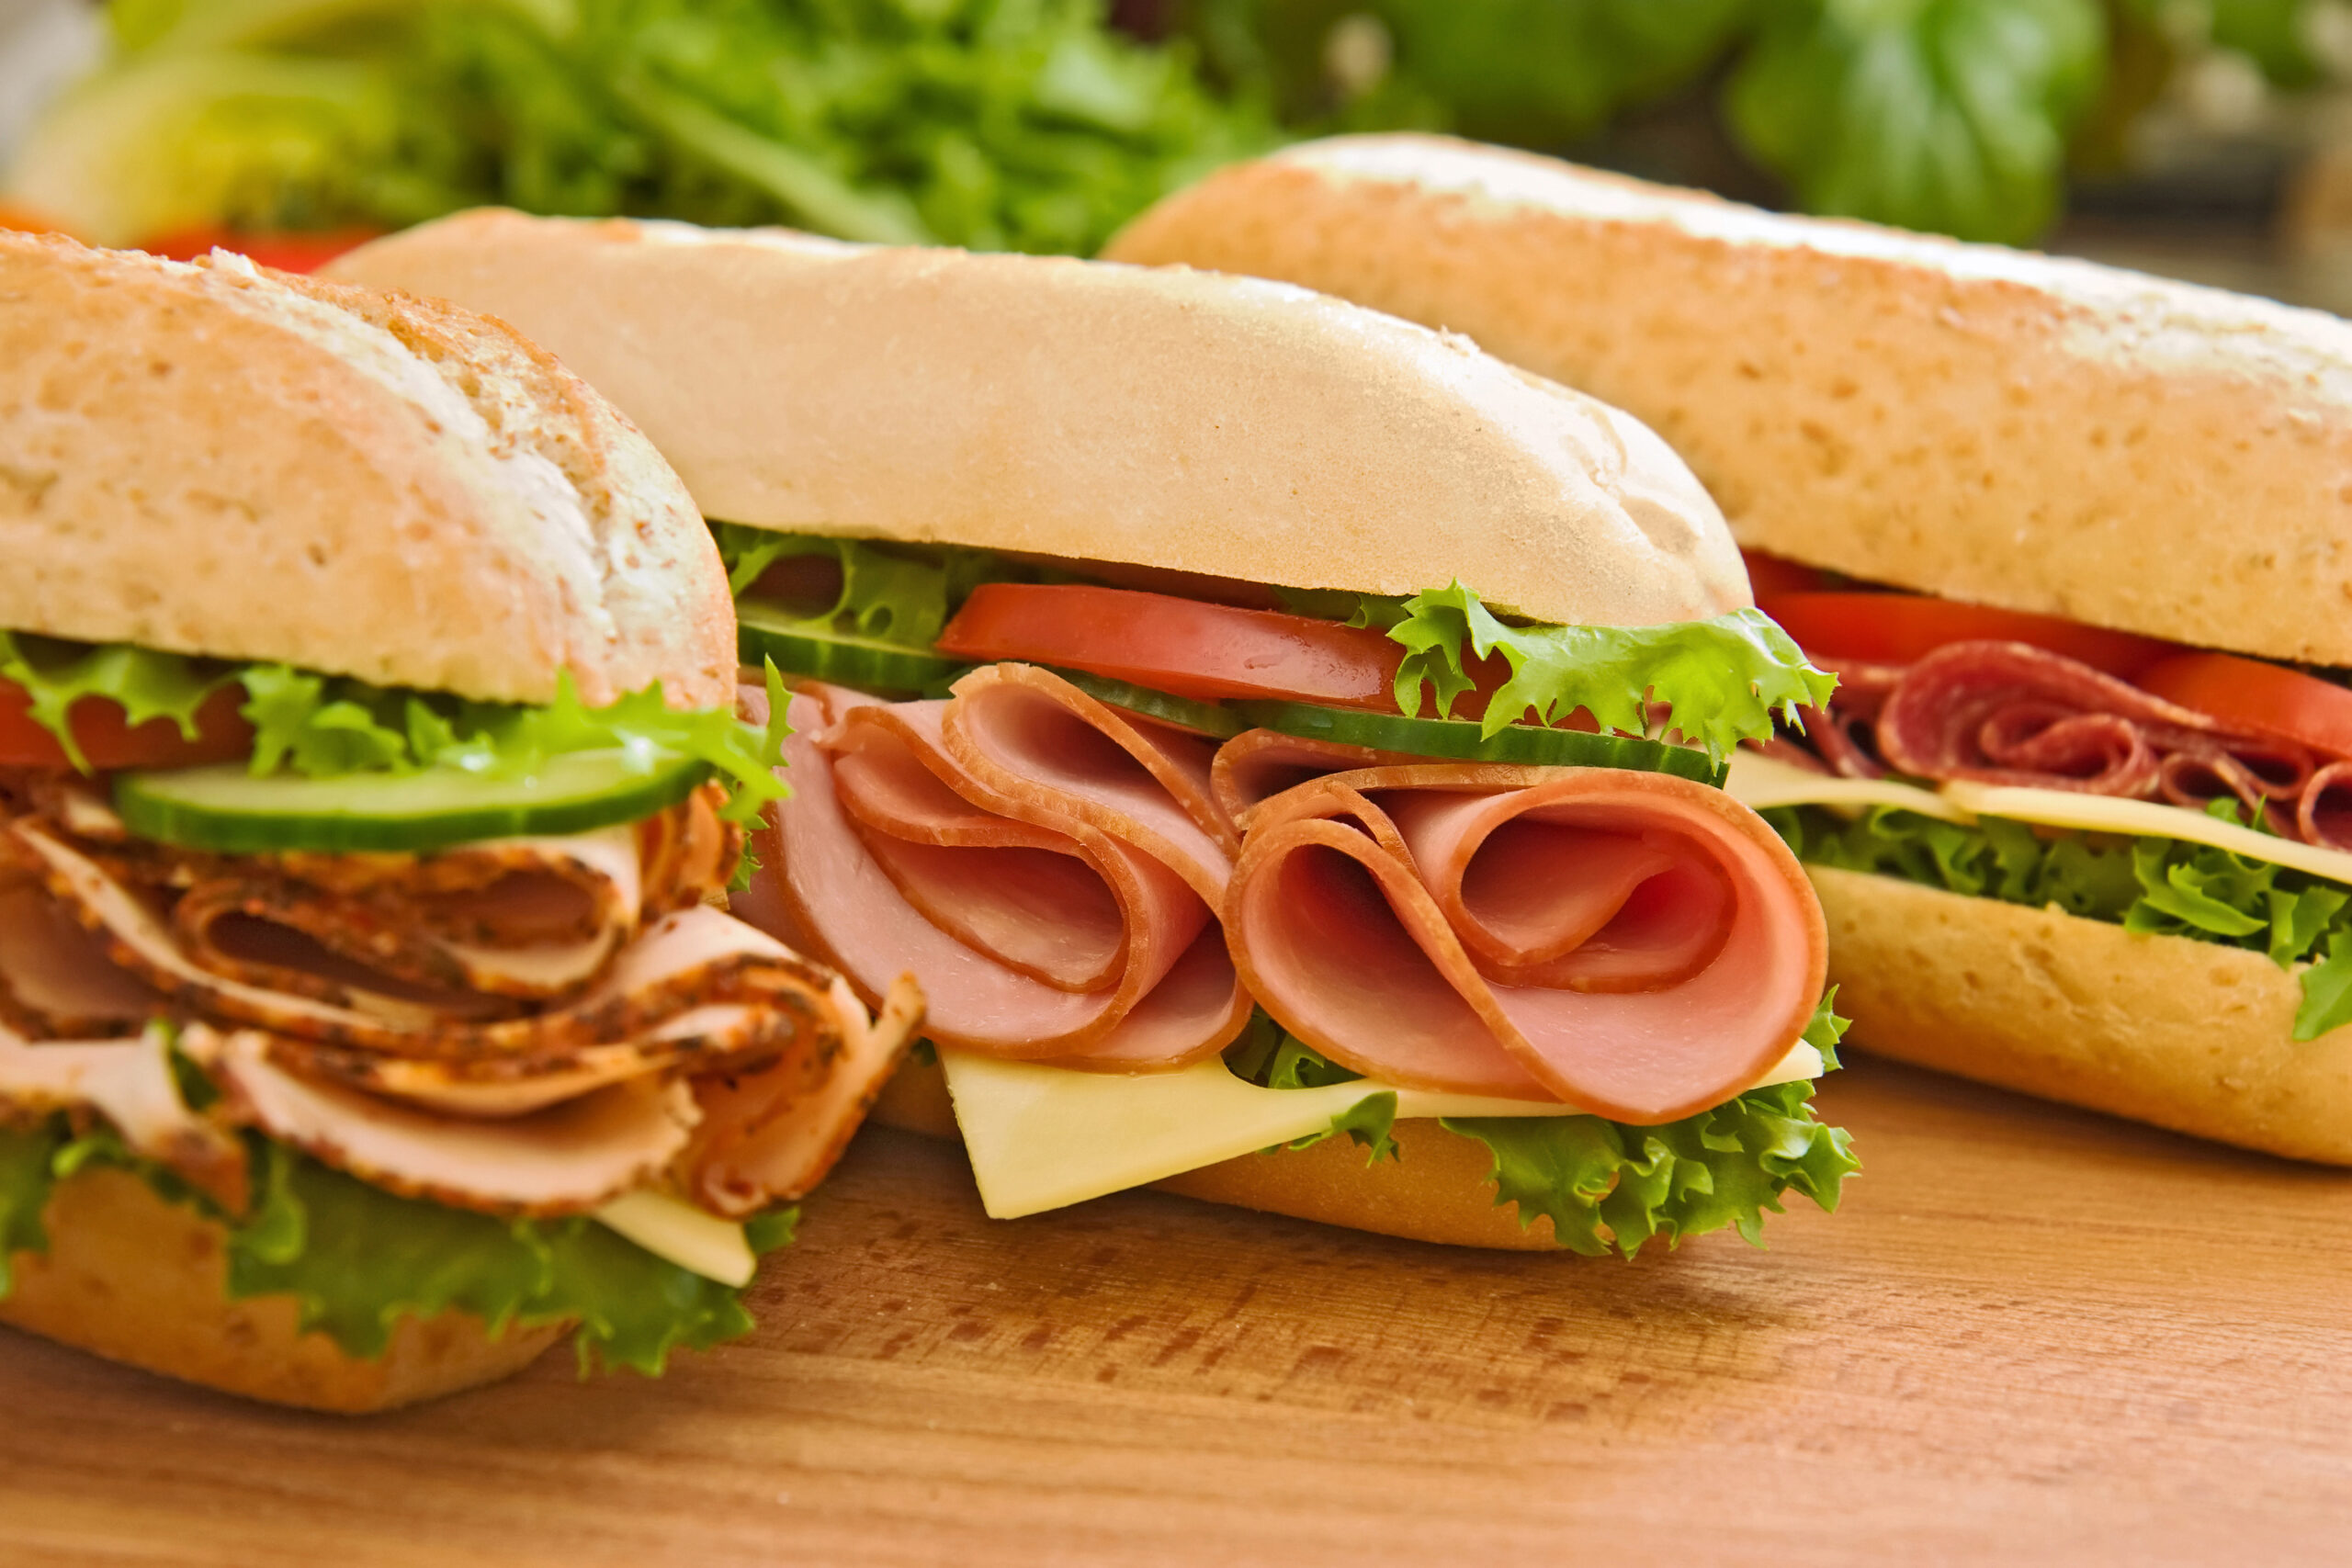 Flavorful Flower Mound Sub Sandwiches Await at Jersey Mike’s Subs